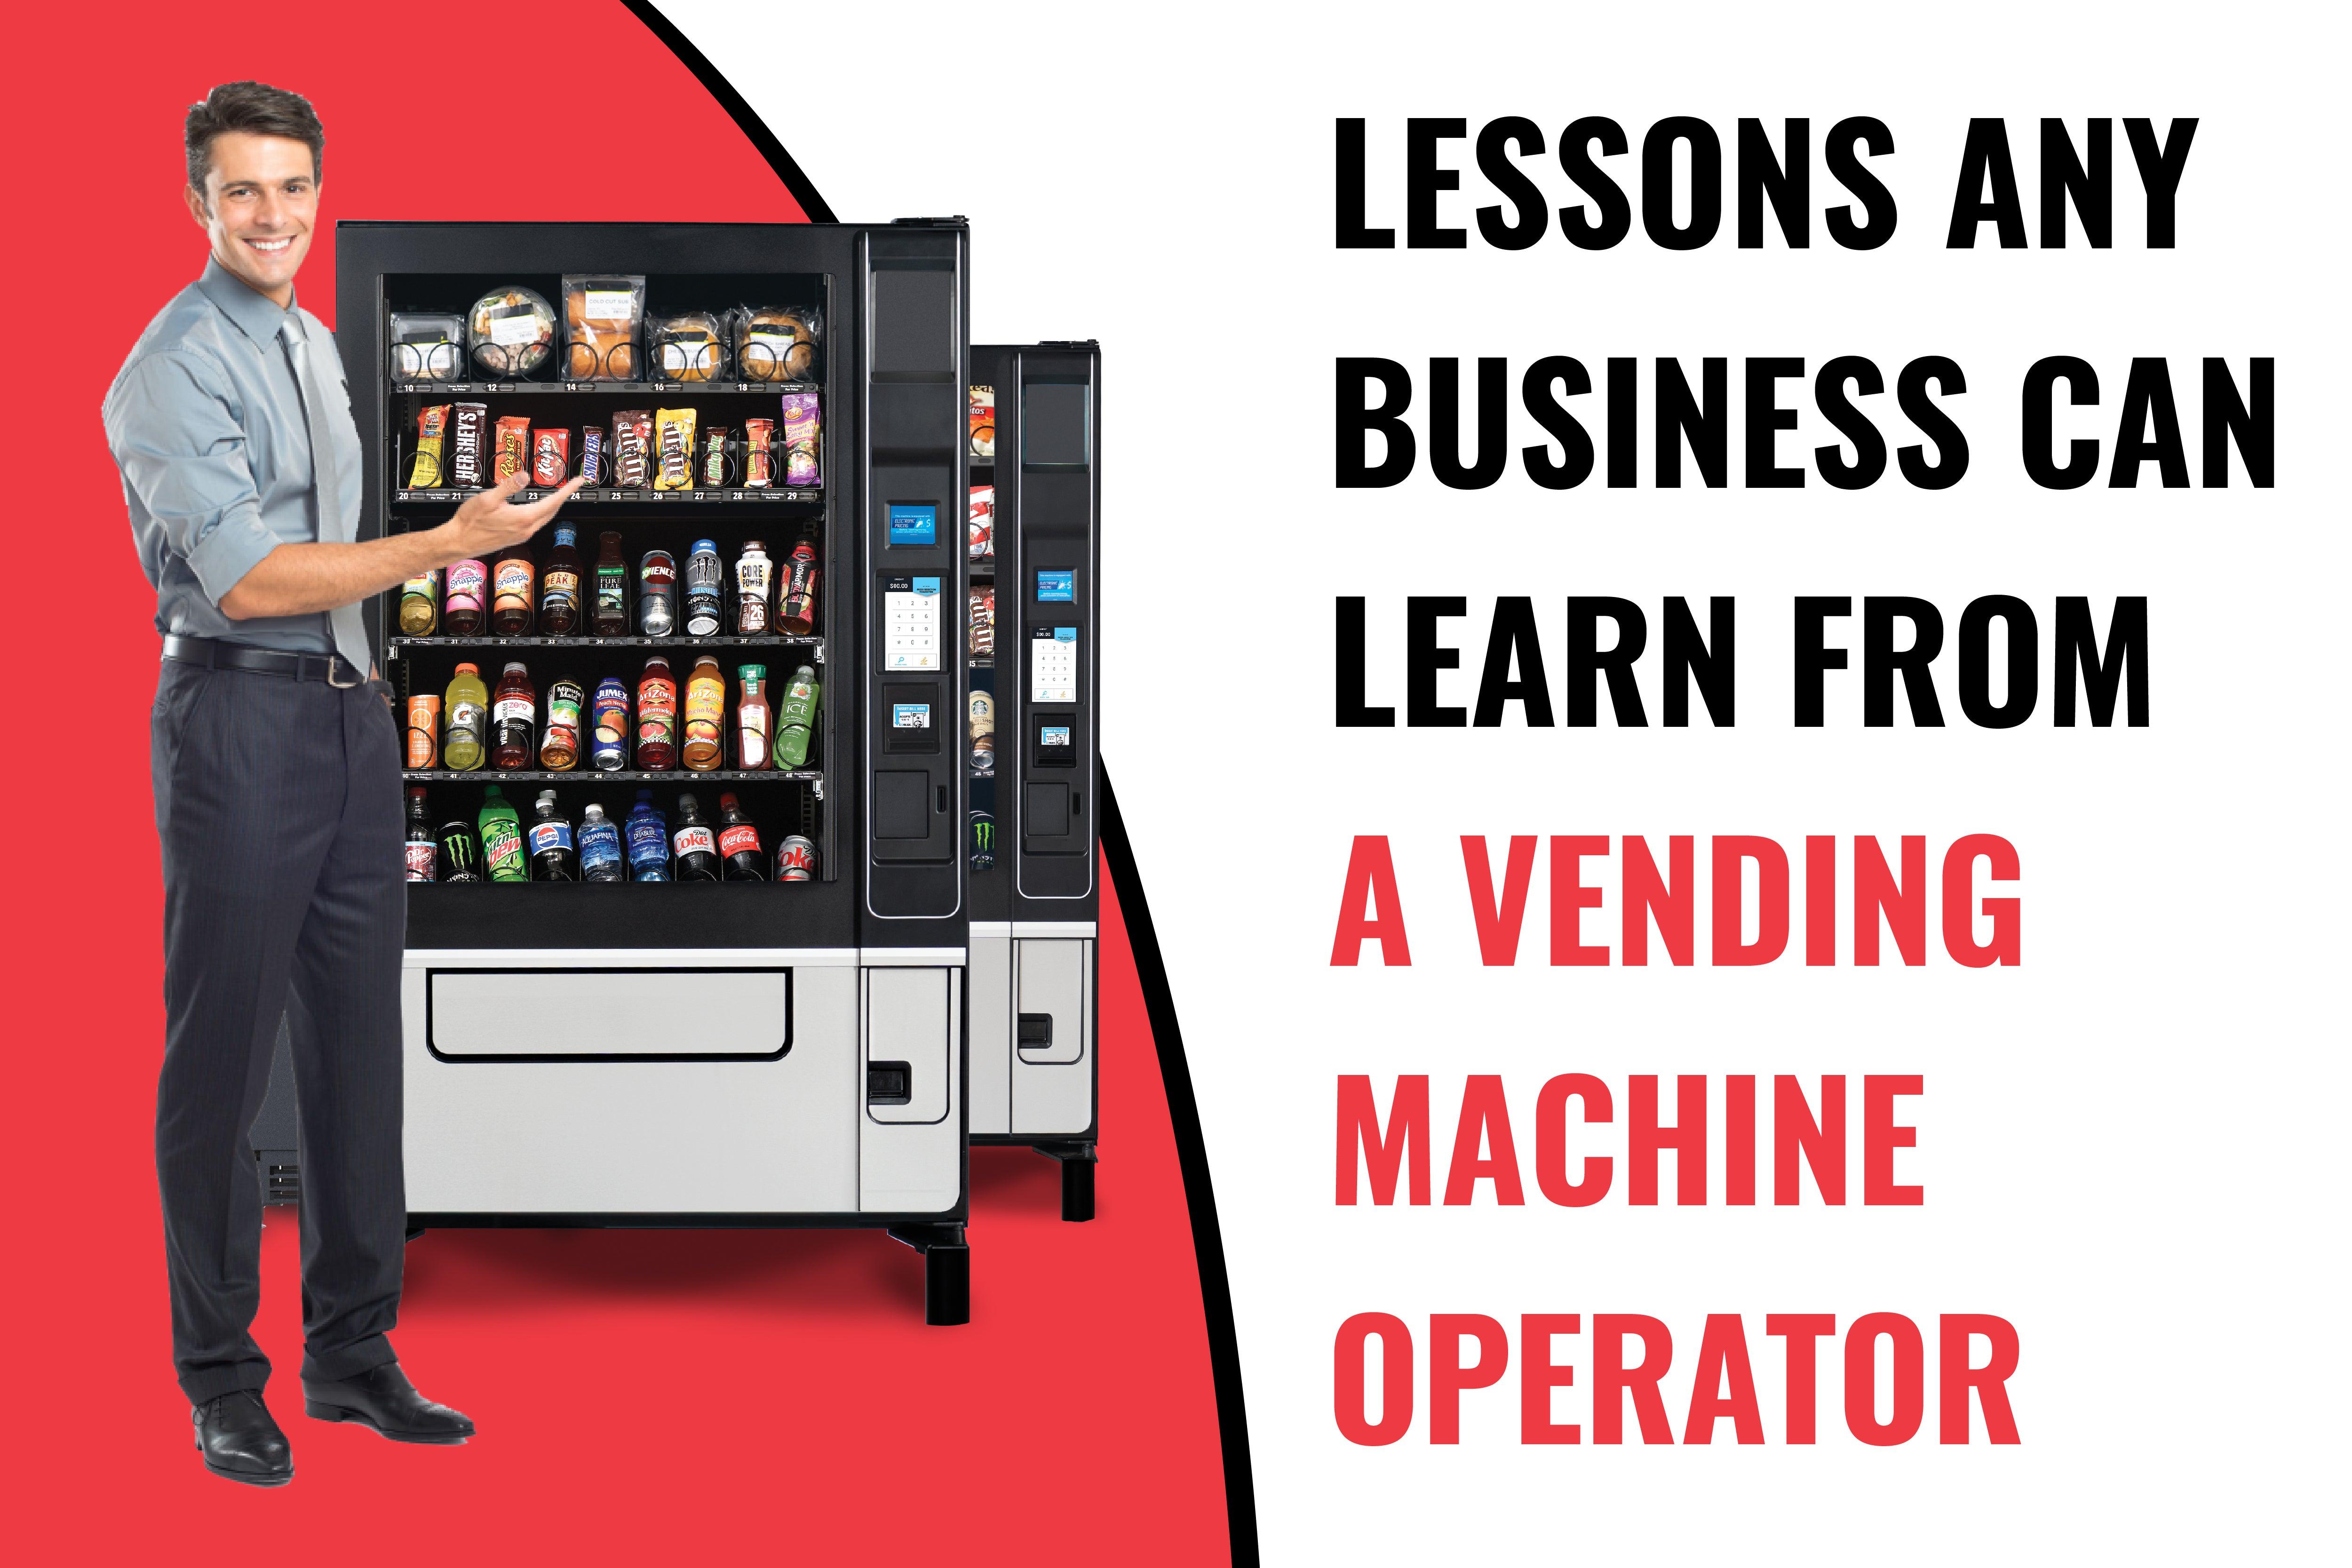 Vending Business: Lessons Any Business Can Learn from a Vending Machine Operator - Vendnet